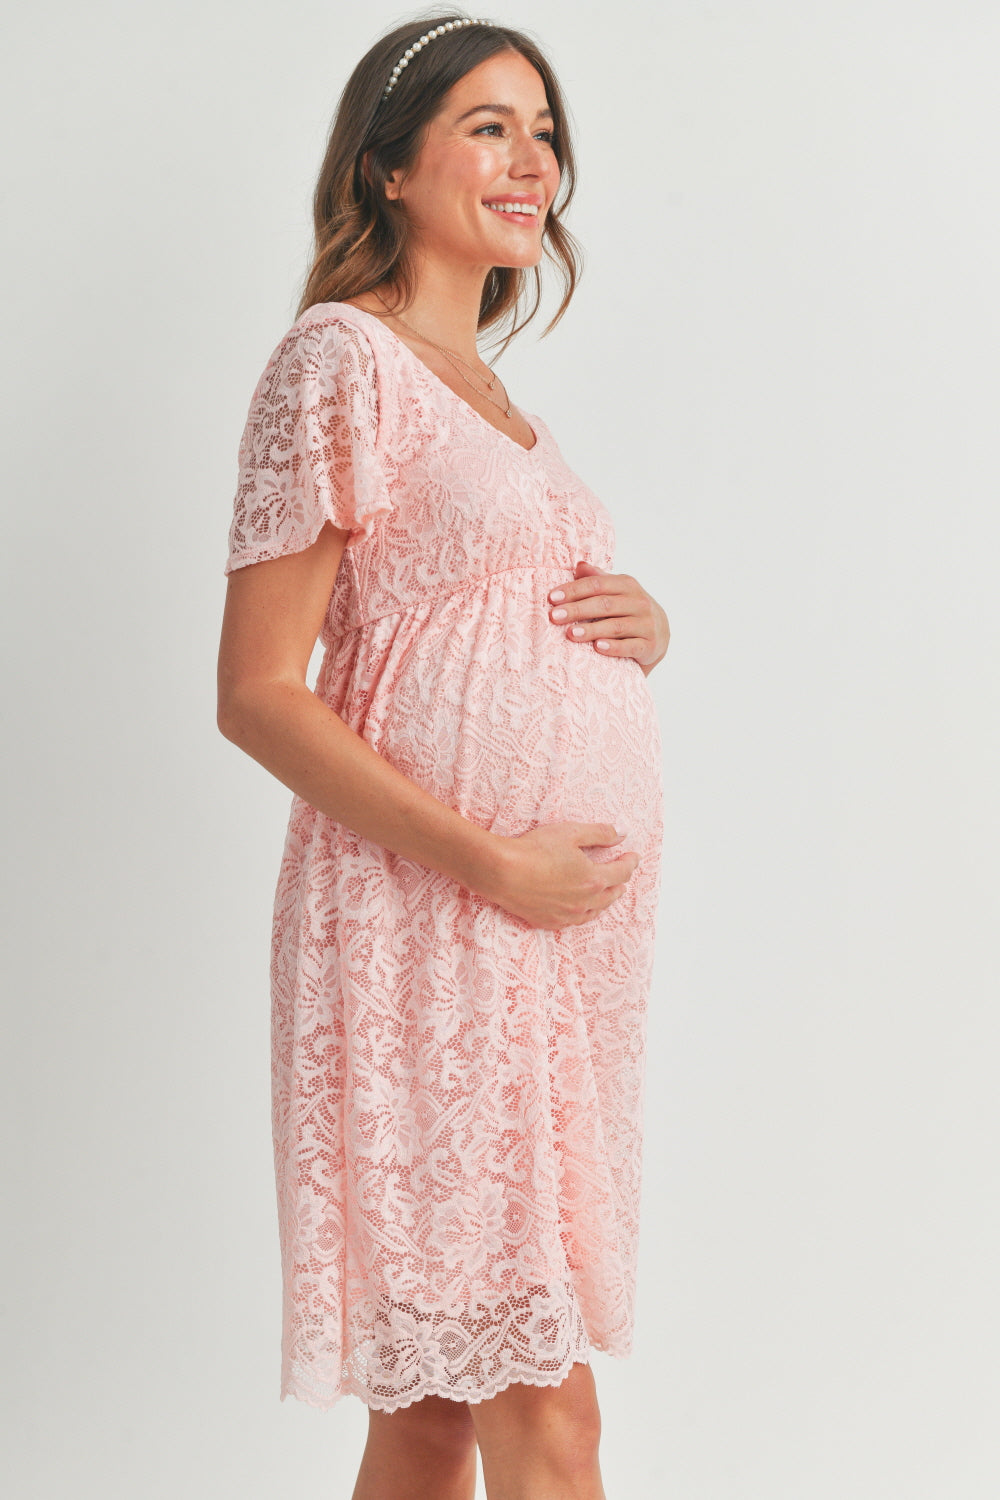 Edith Kimono Maternity Dress in Seashell Pink - Maternity Wedding Dresses,  Evening Wear and Party Clothes by Tiffany Rose US